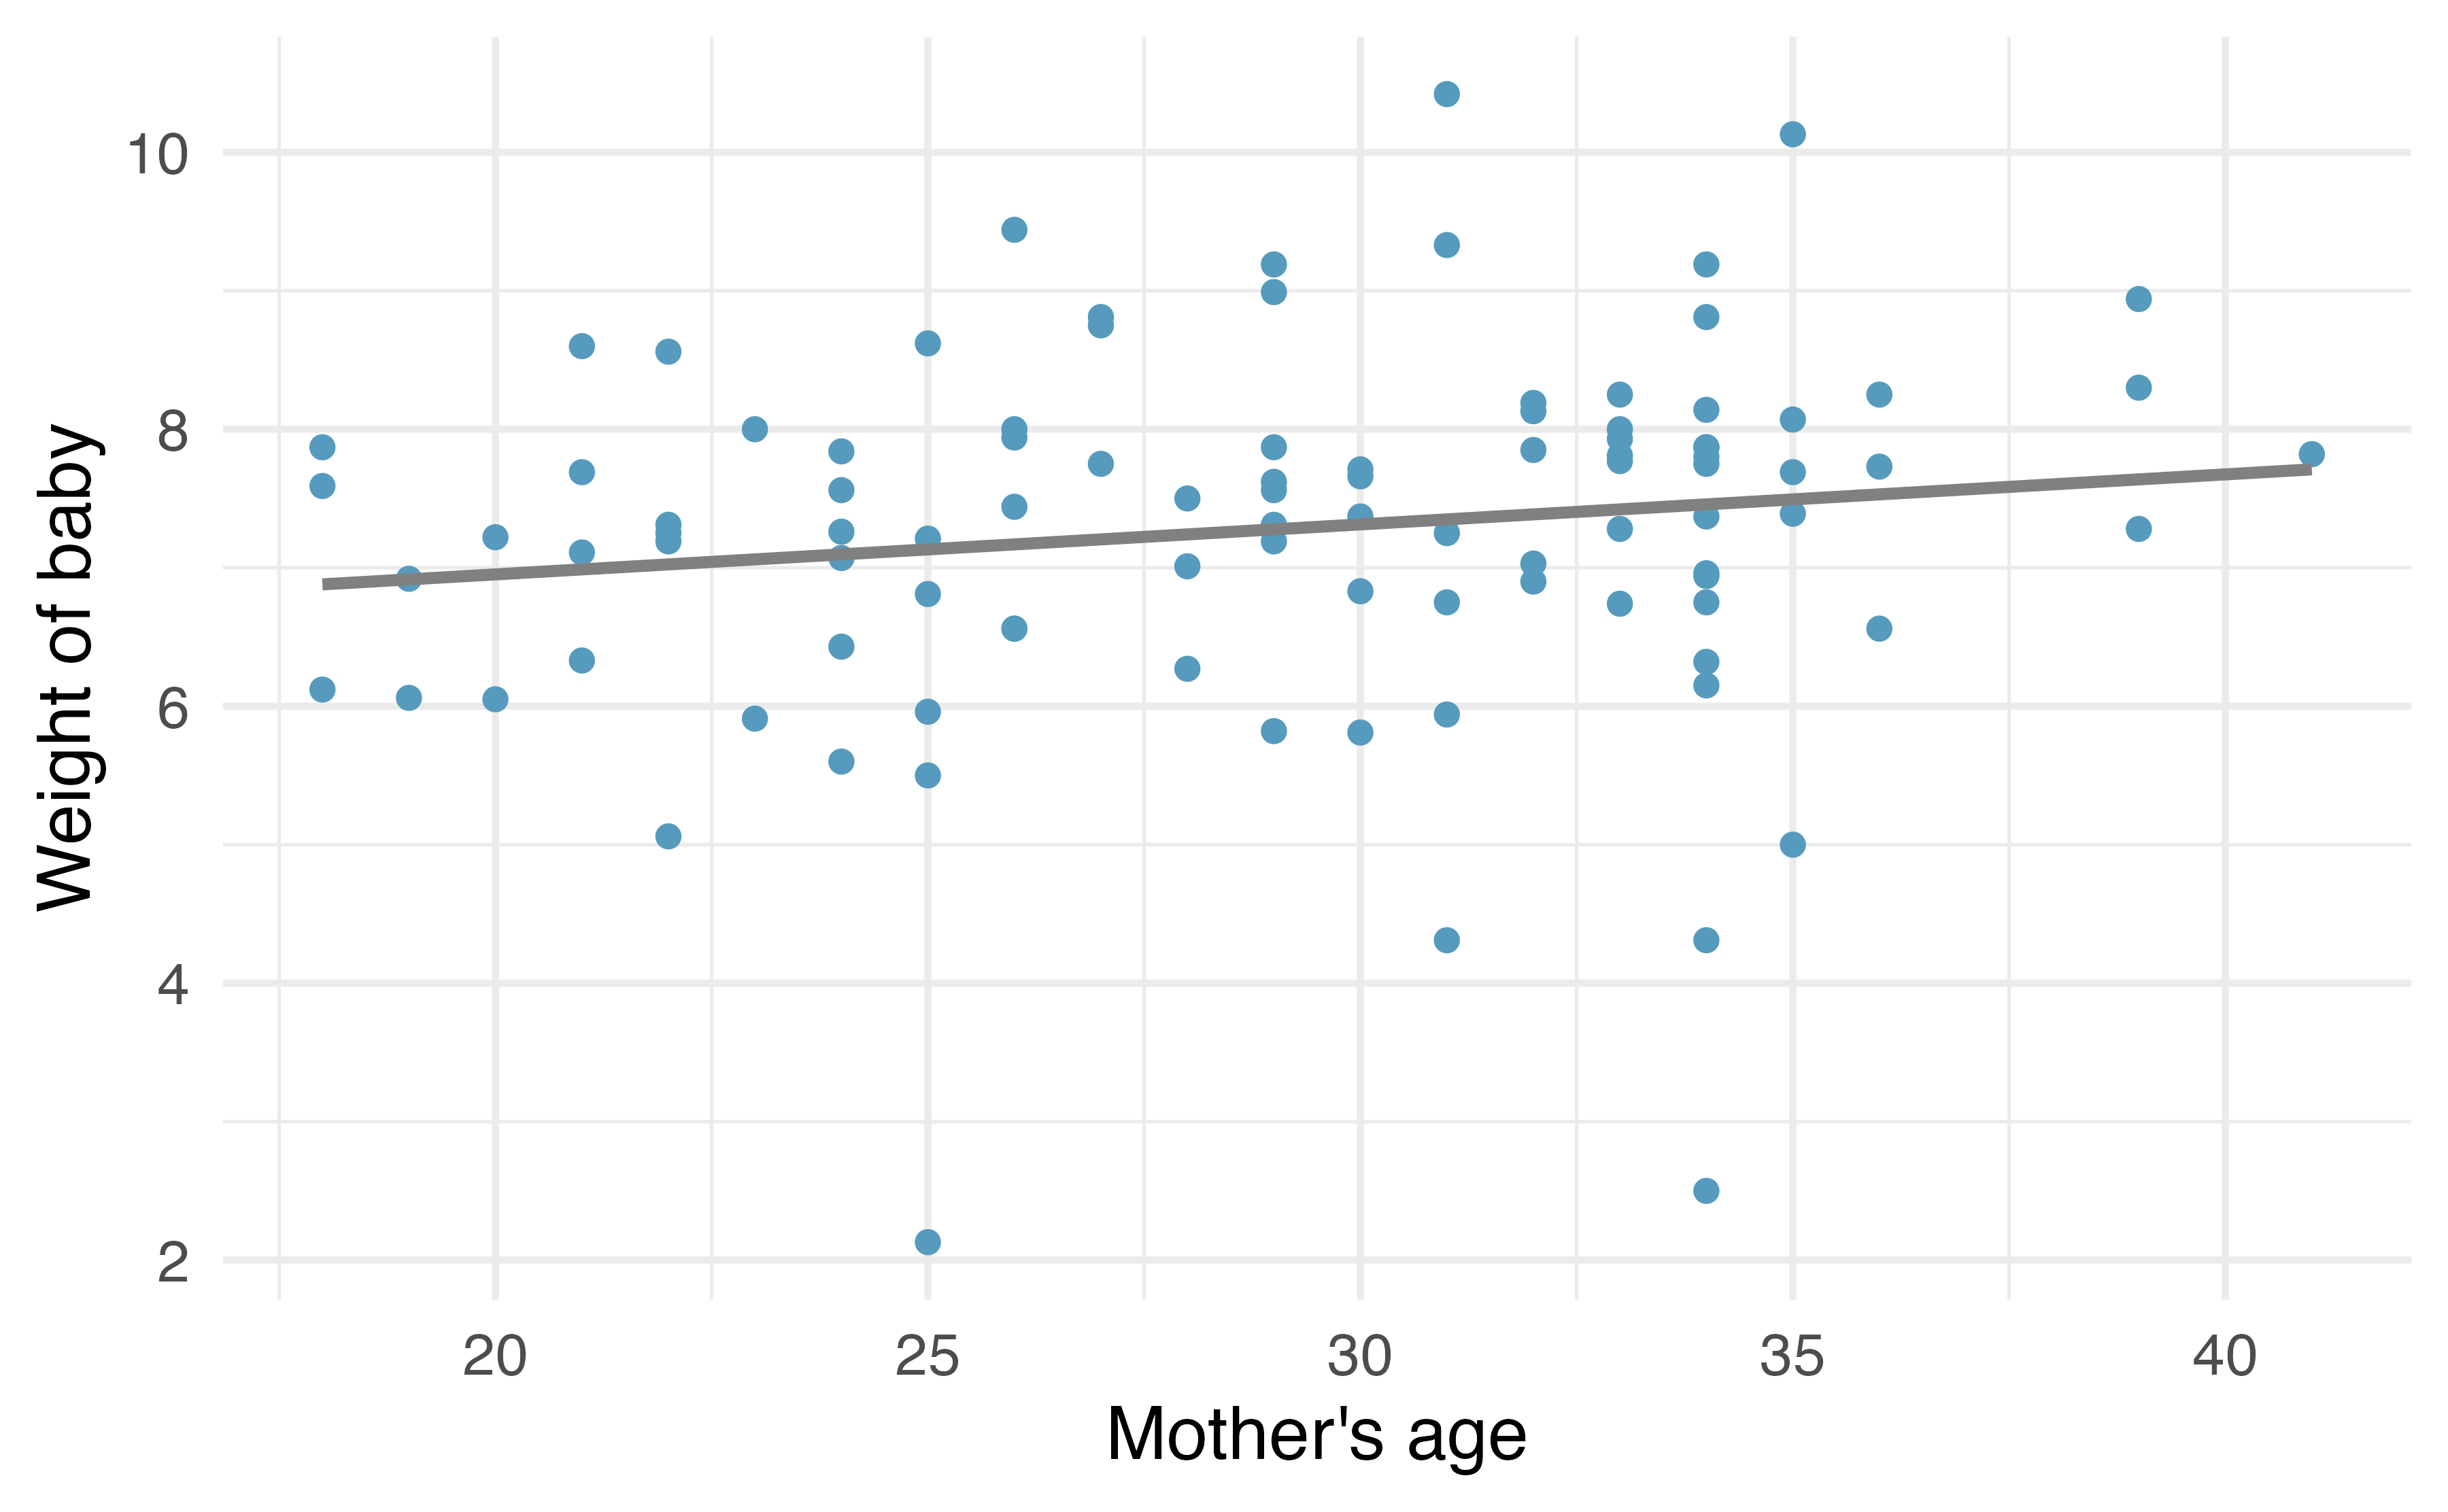 Original data: weight of baby as a linear model of mother’s age. Notice that the relationship between mage and weight is not as strong as the relationship we saw previously between weeks and weight.